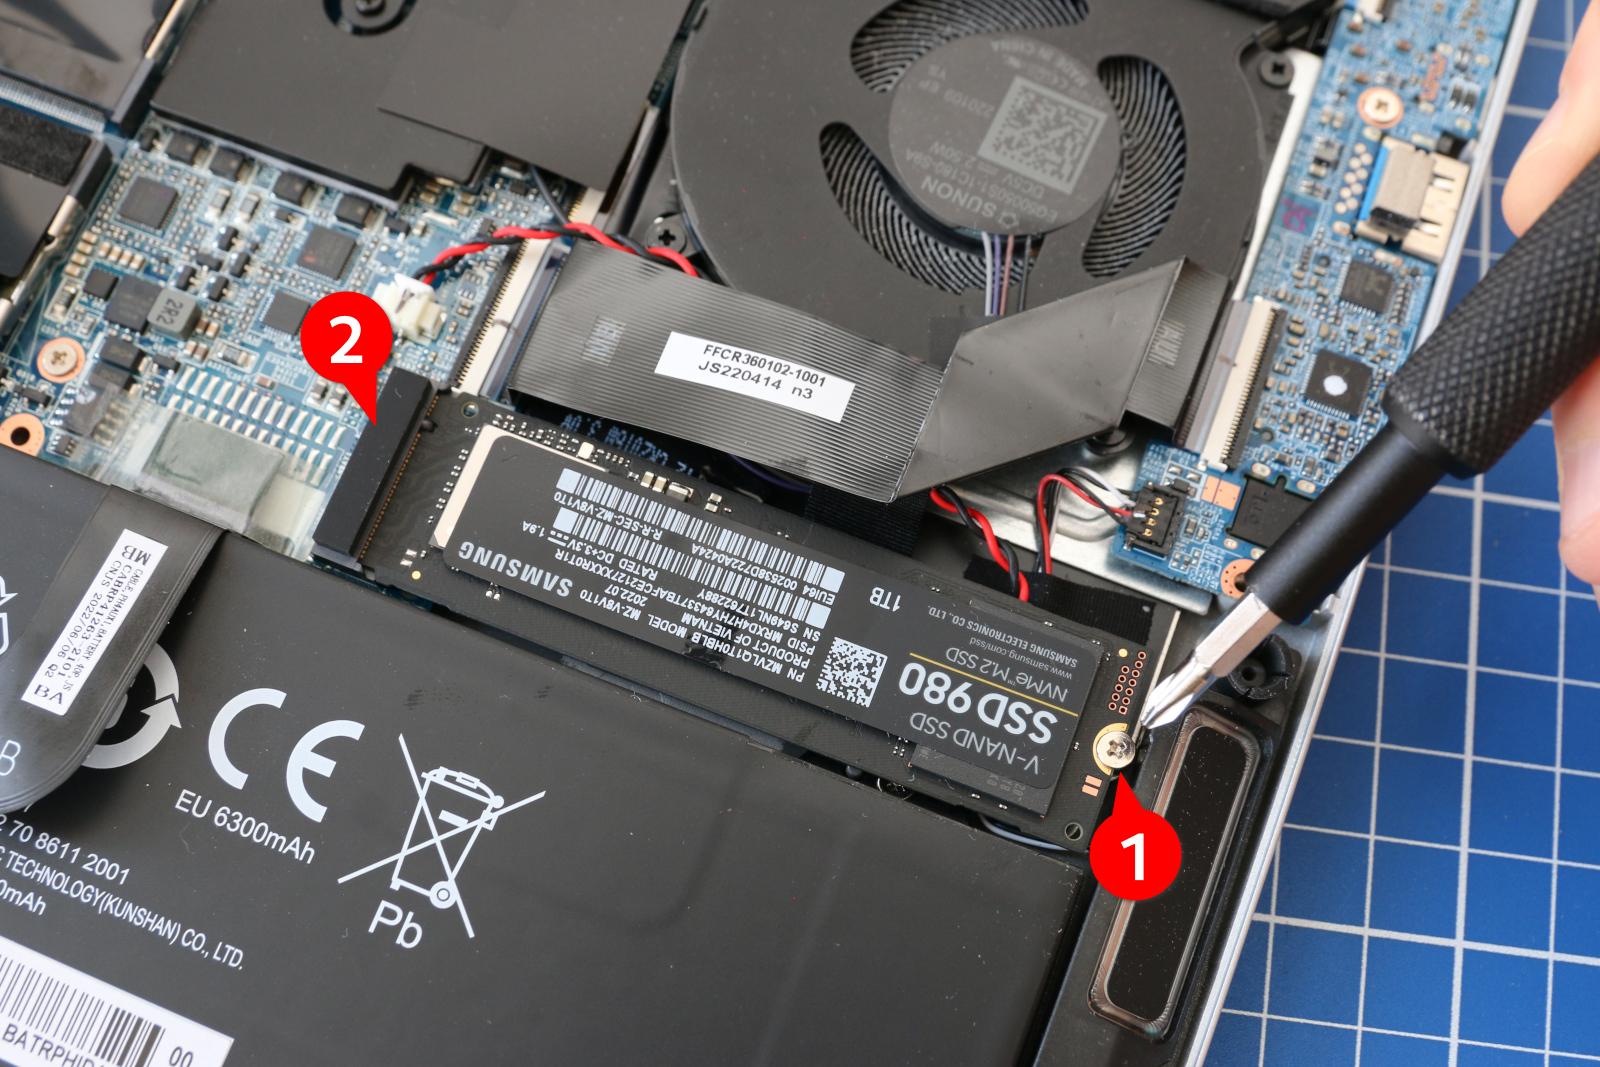 In the case you want to remove the SSD module, unscrew the locking screw and tilt the board upwards out of the socket.